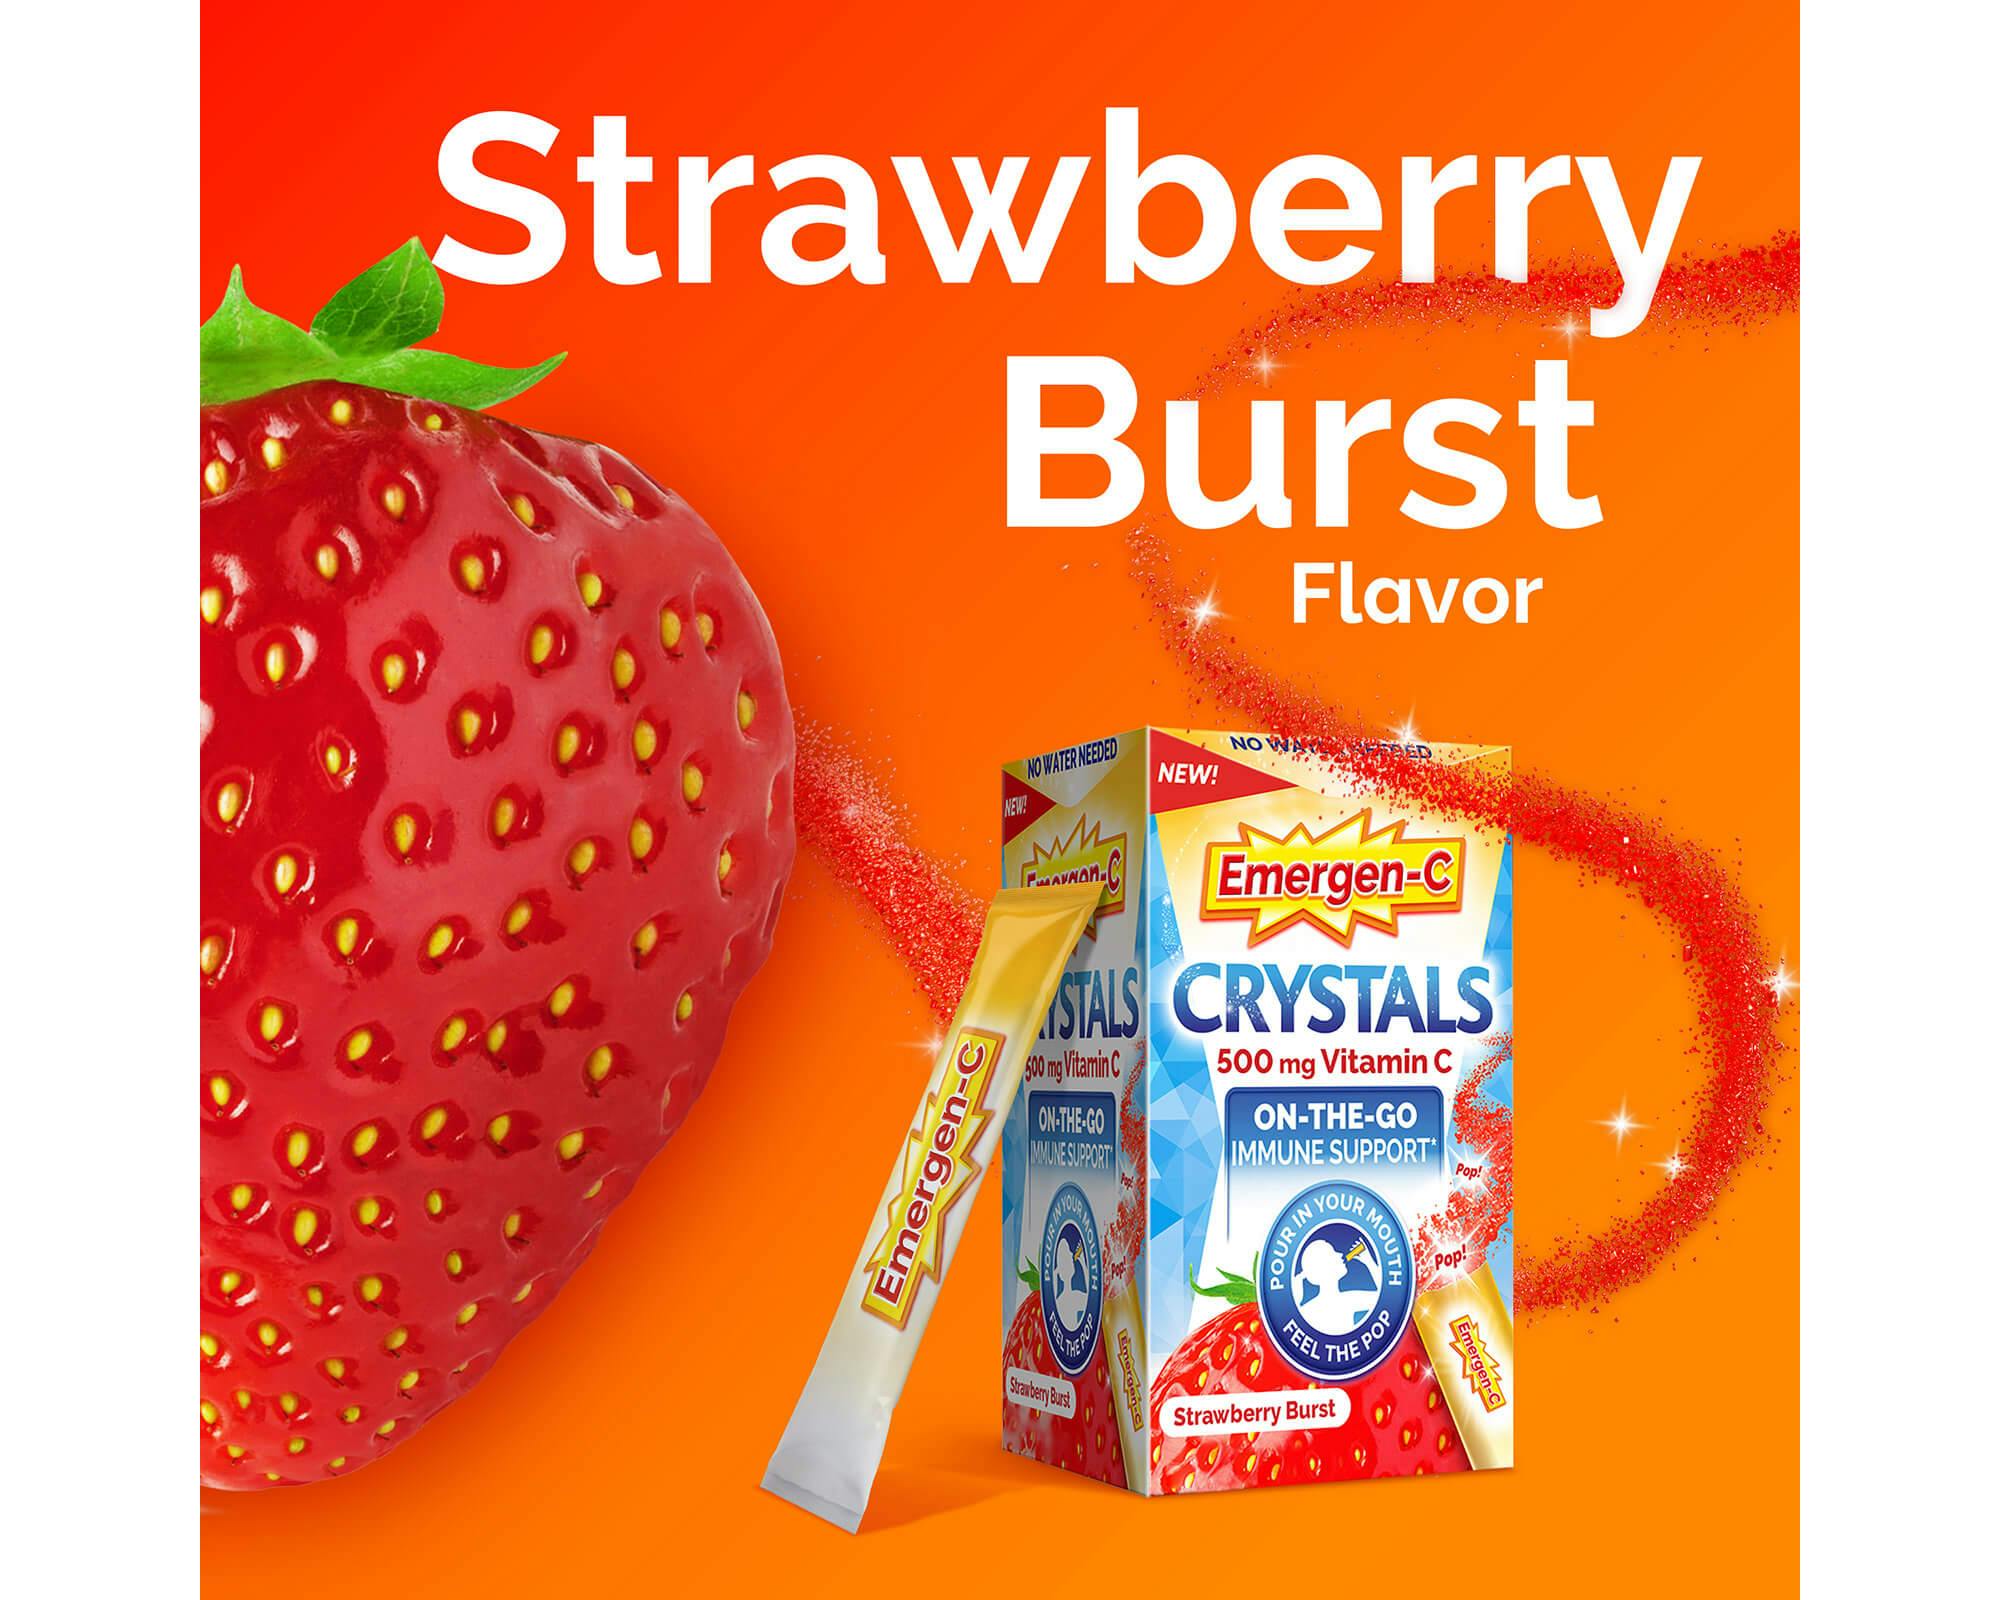 Emergen-C Crystals Strawberry Burst product with strawberry